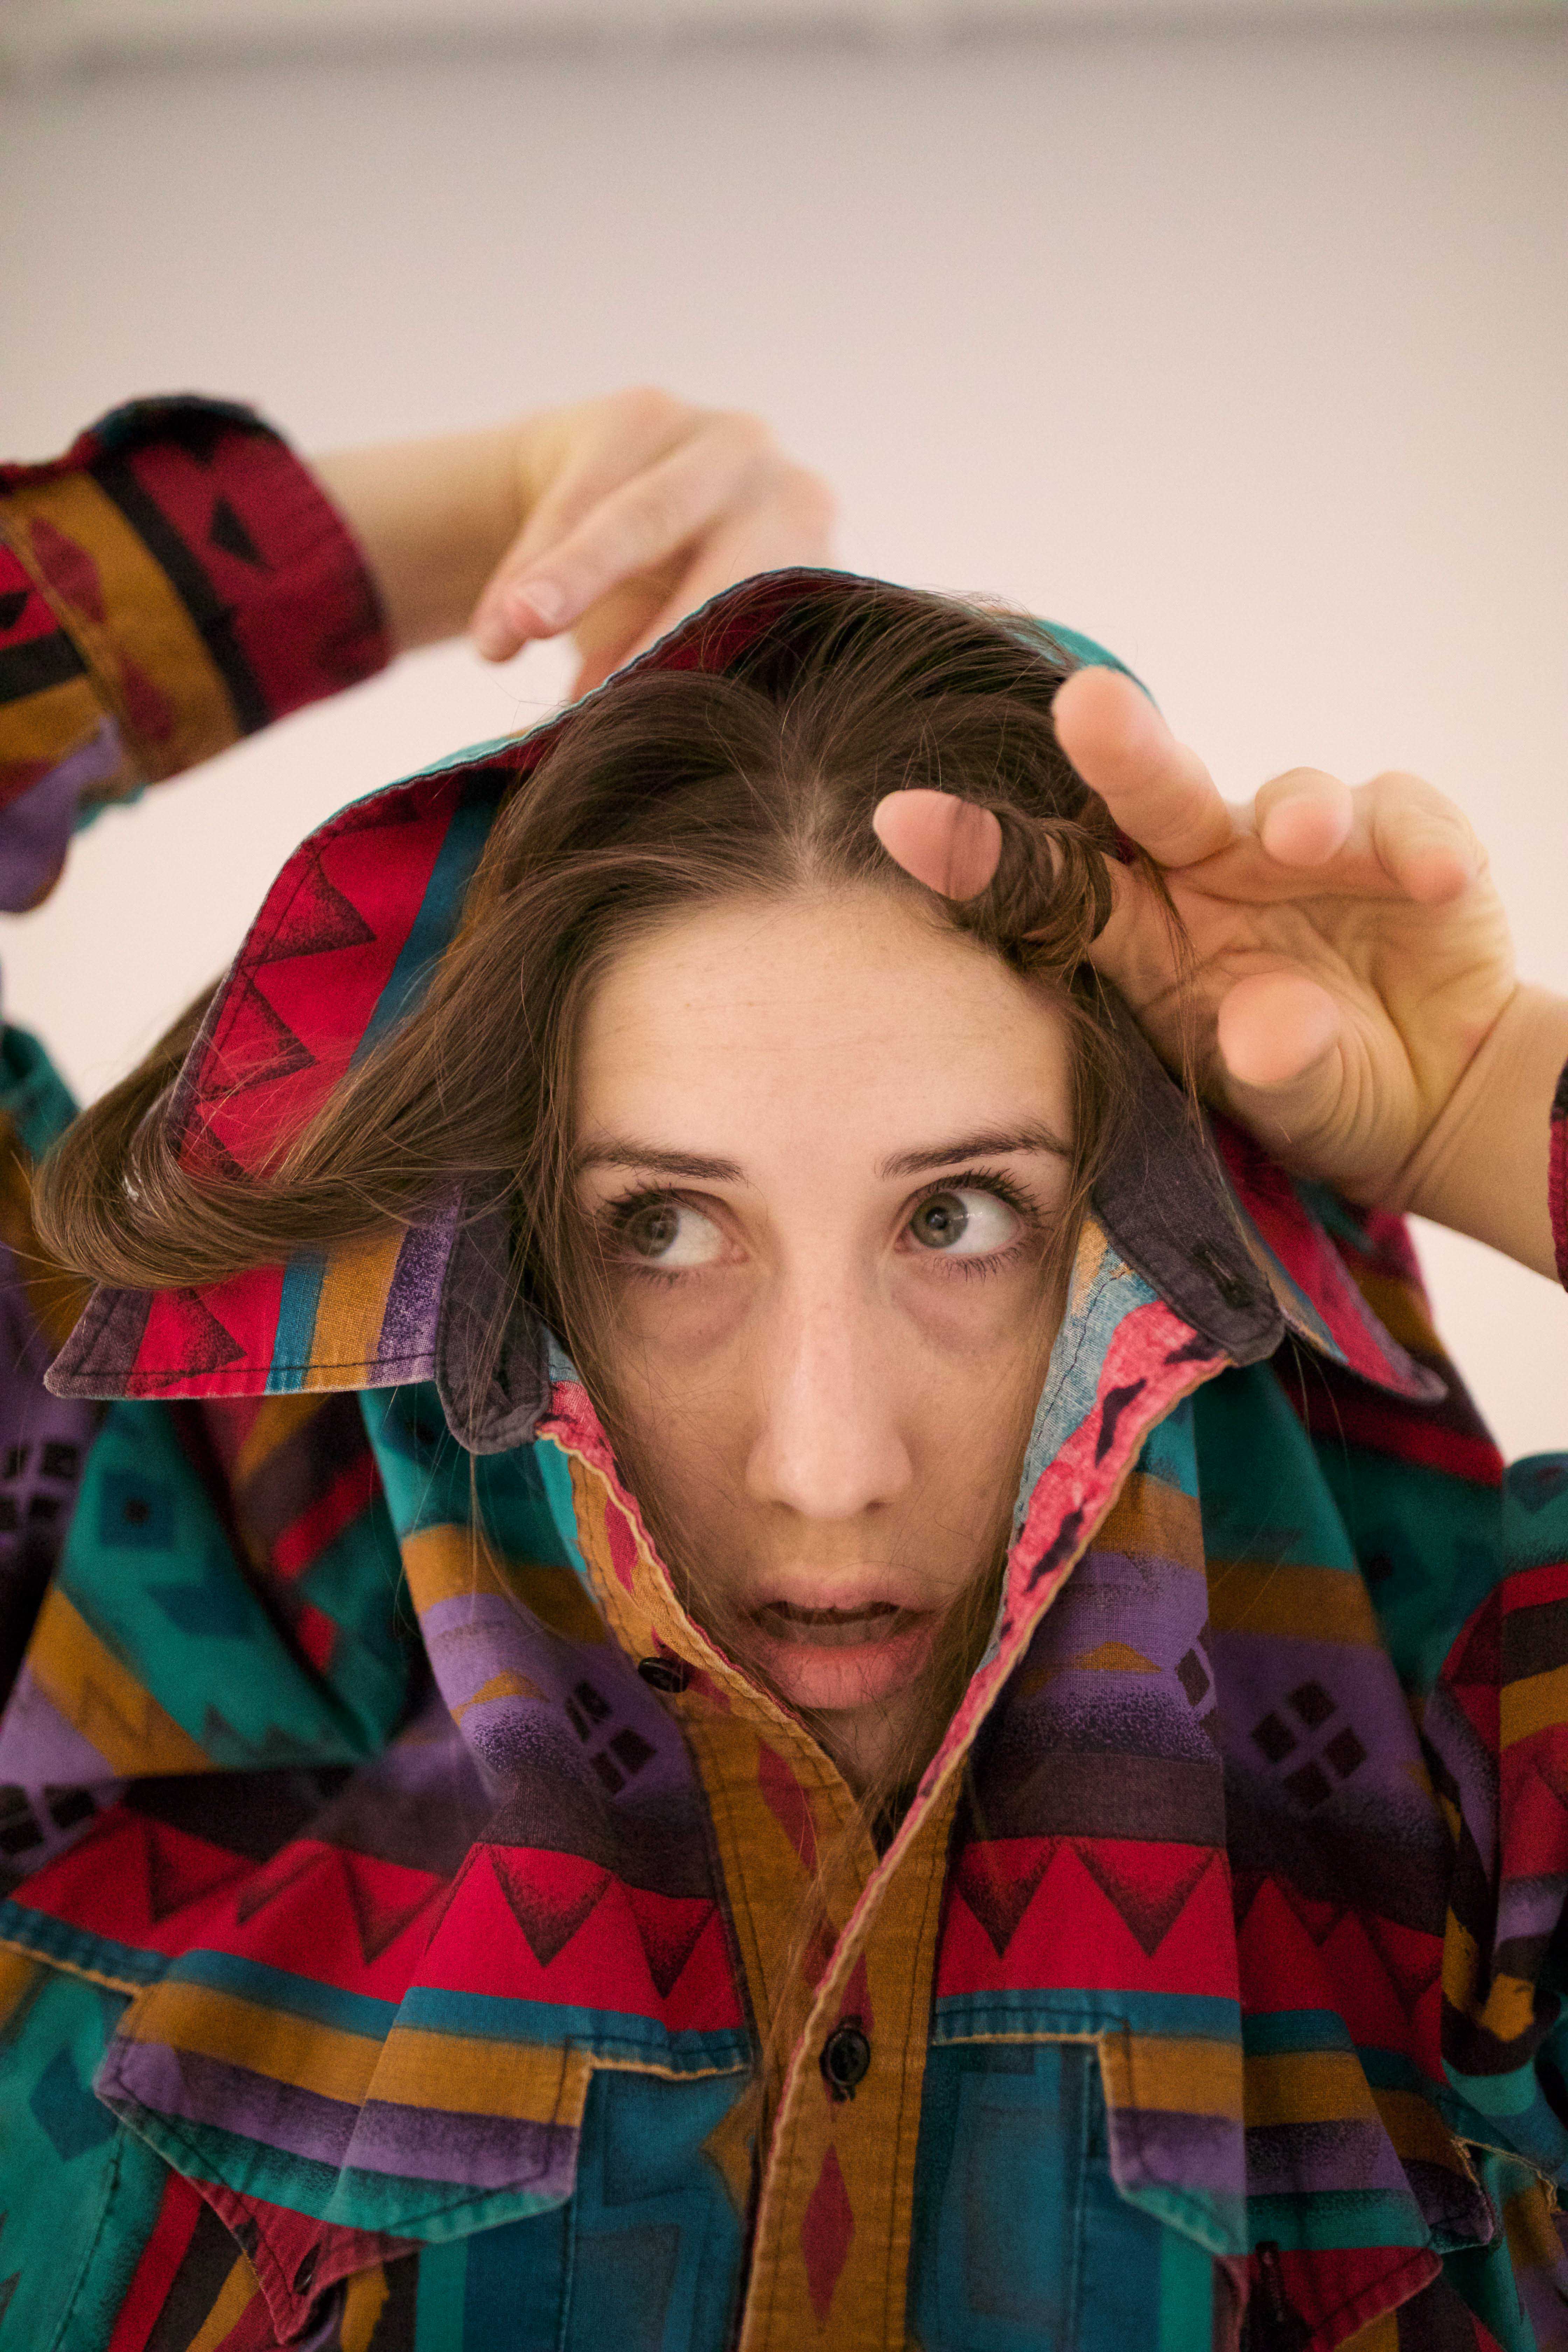 Woman disappearing into a colourful shirt, whose collar is pulled up behind her head